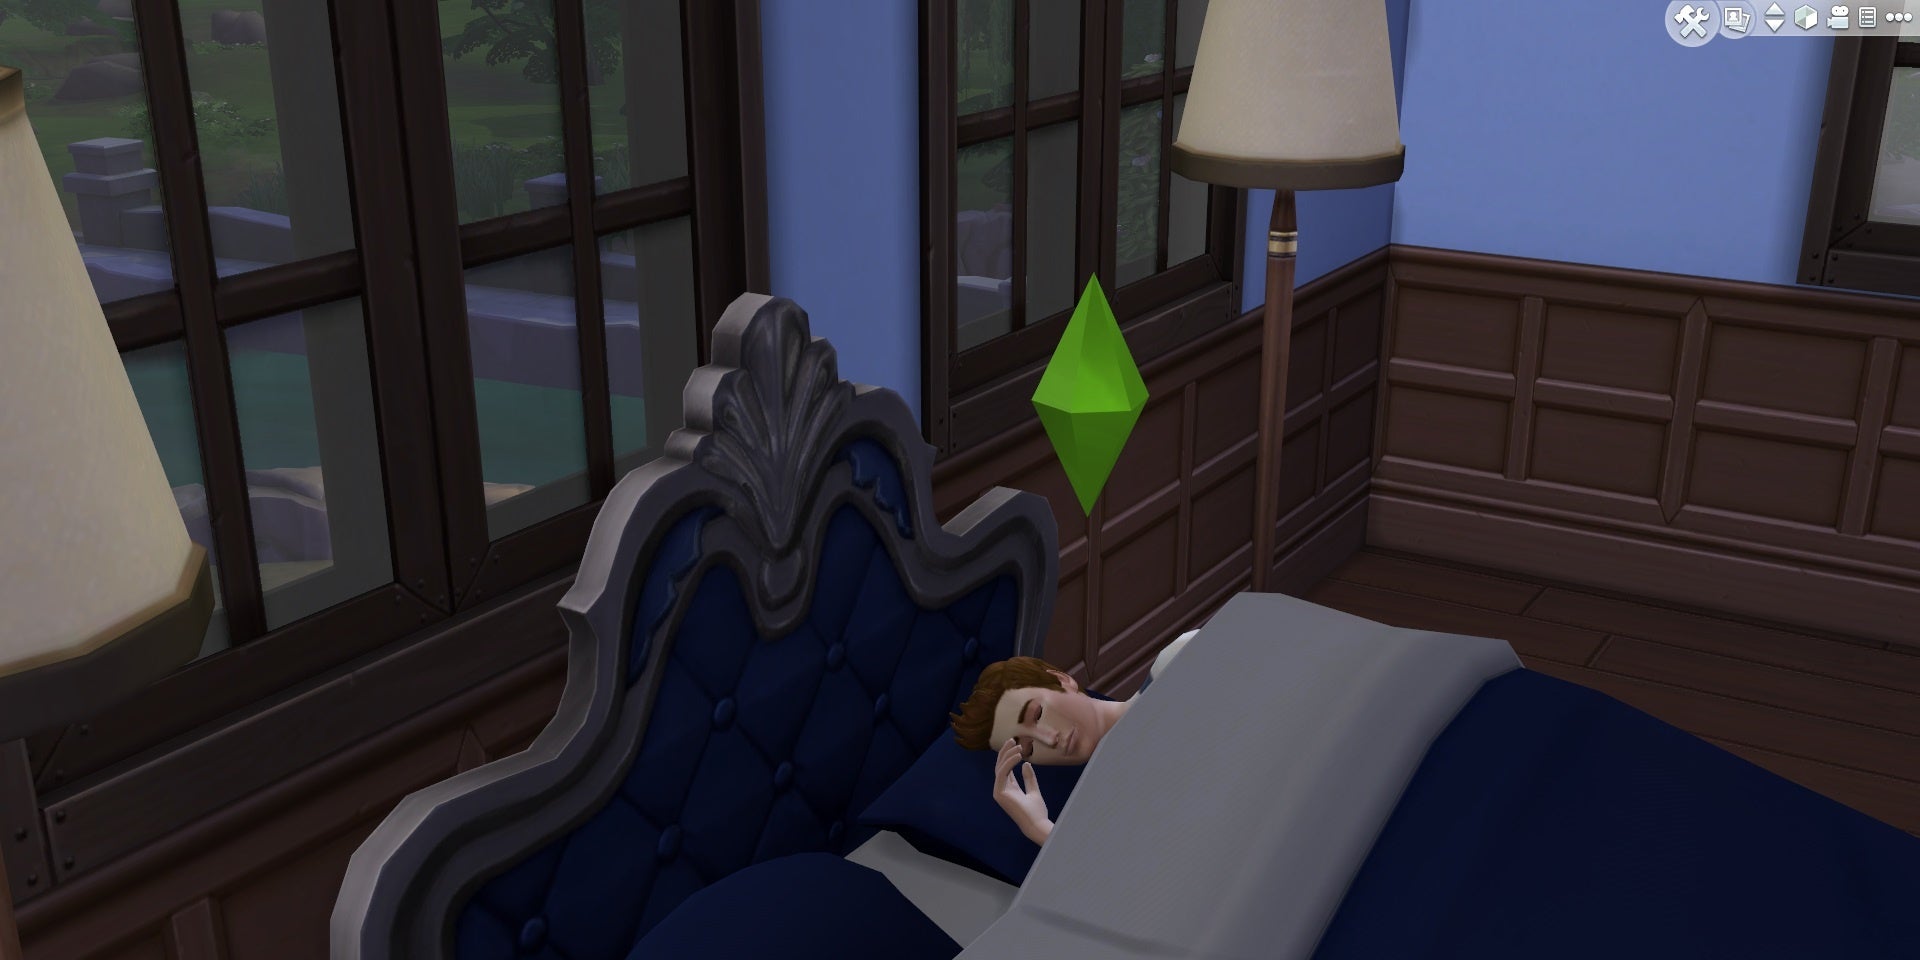 The Sims 4 a Sim sleeps in bed.